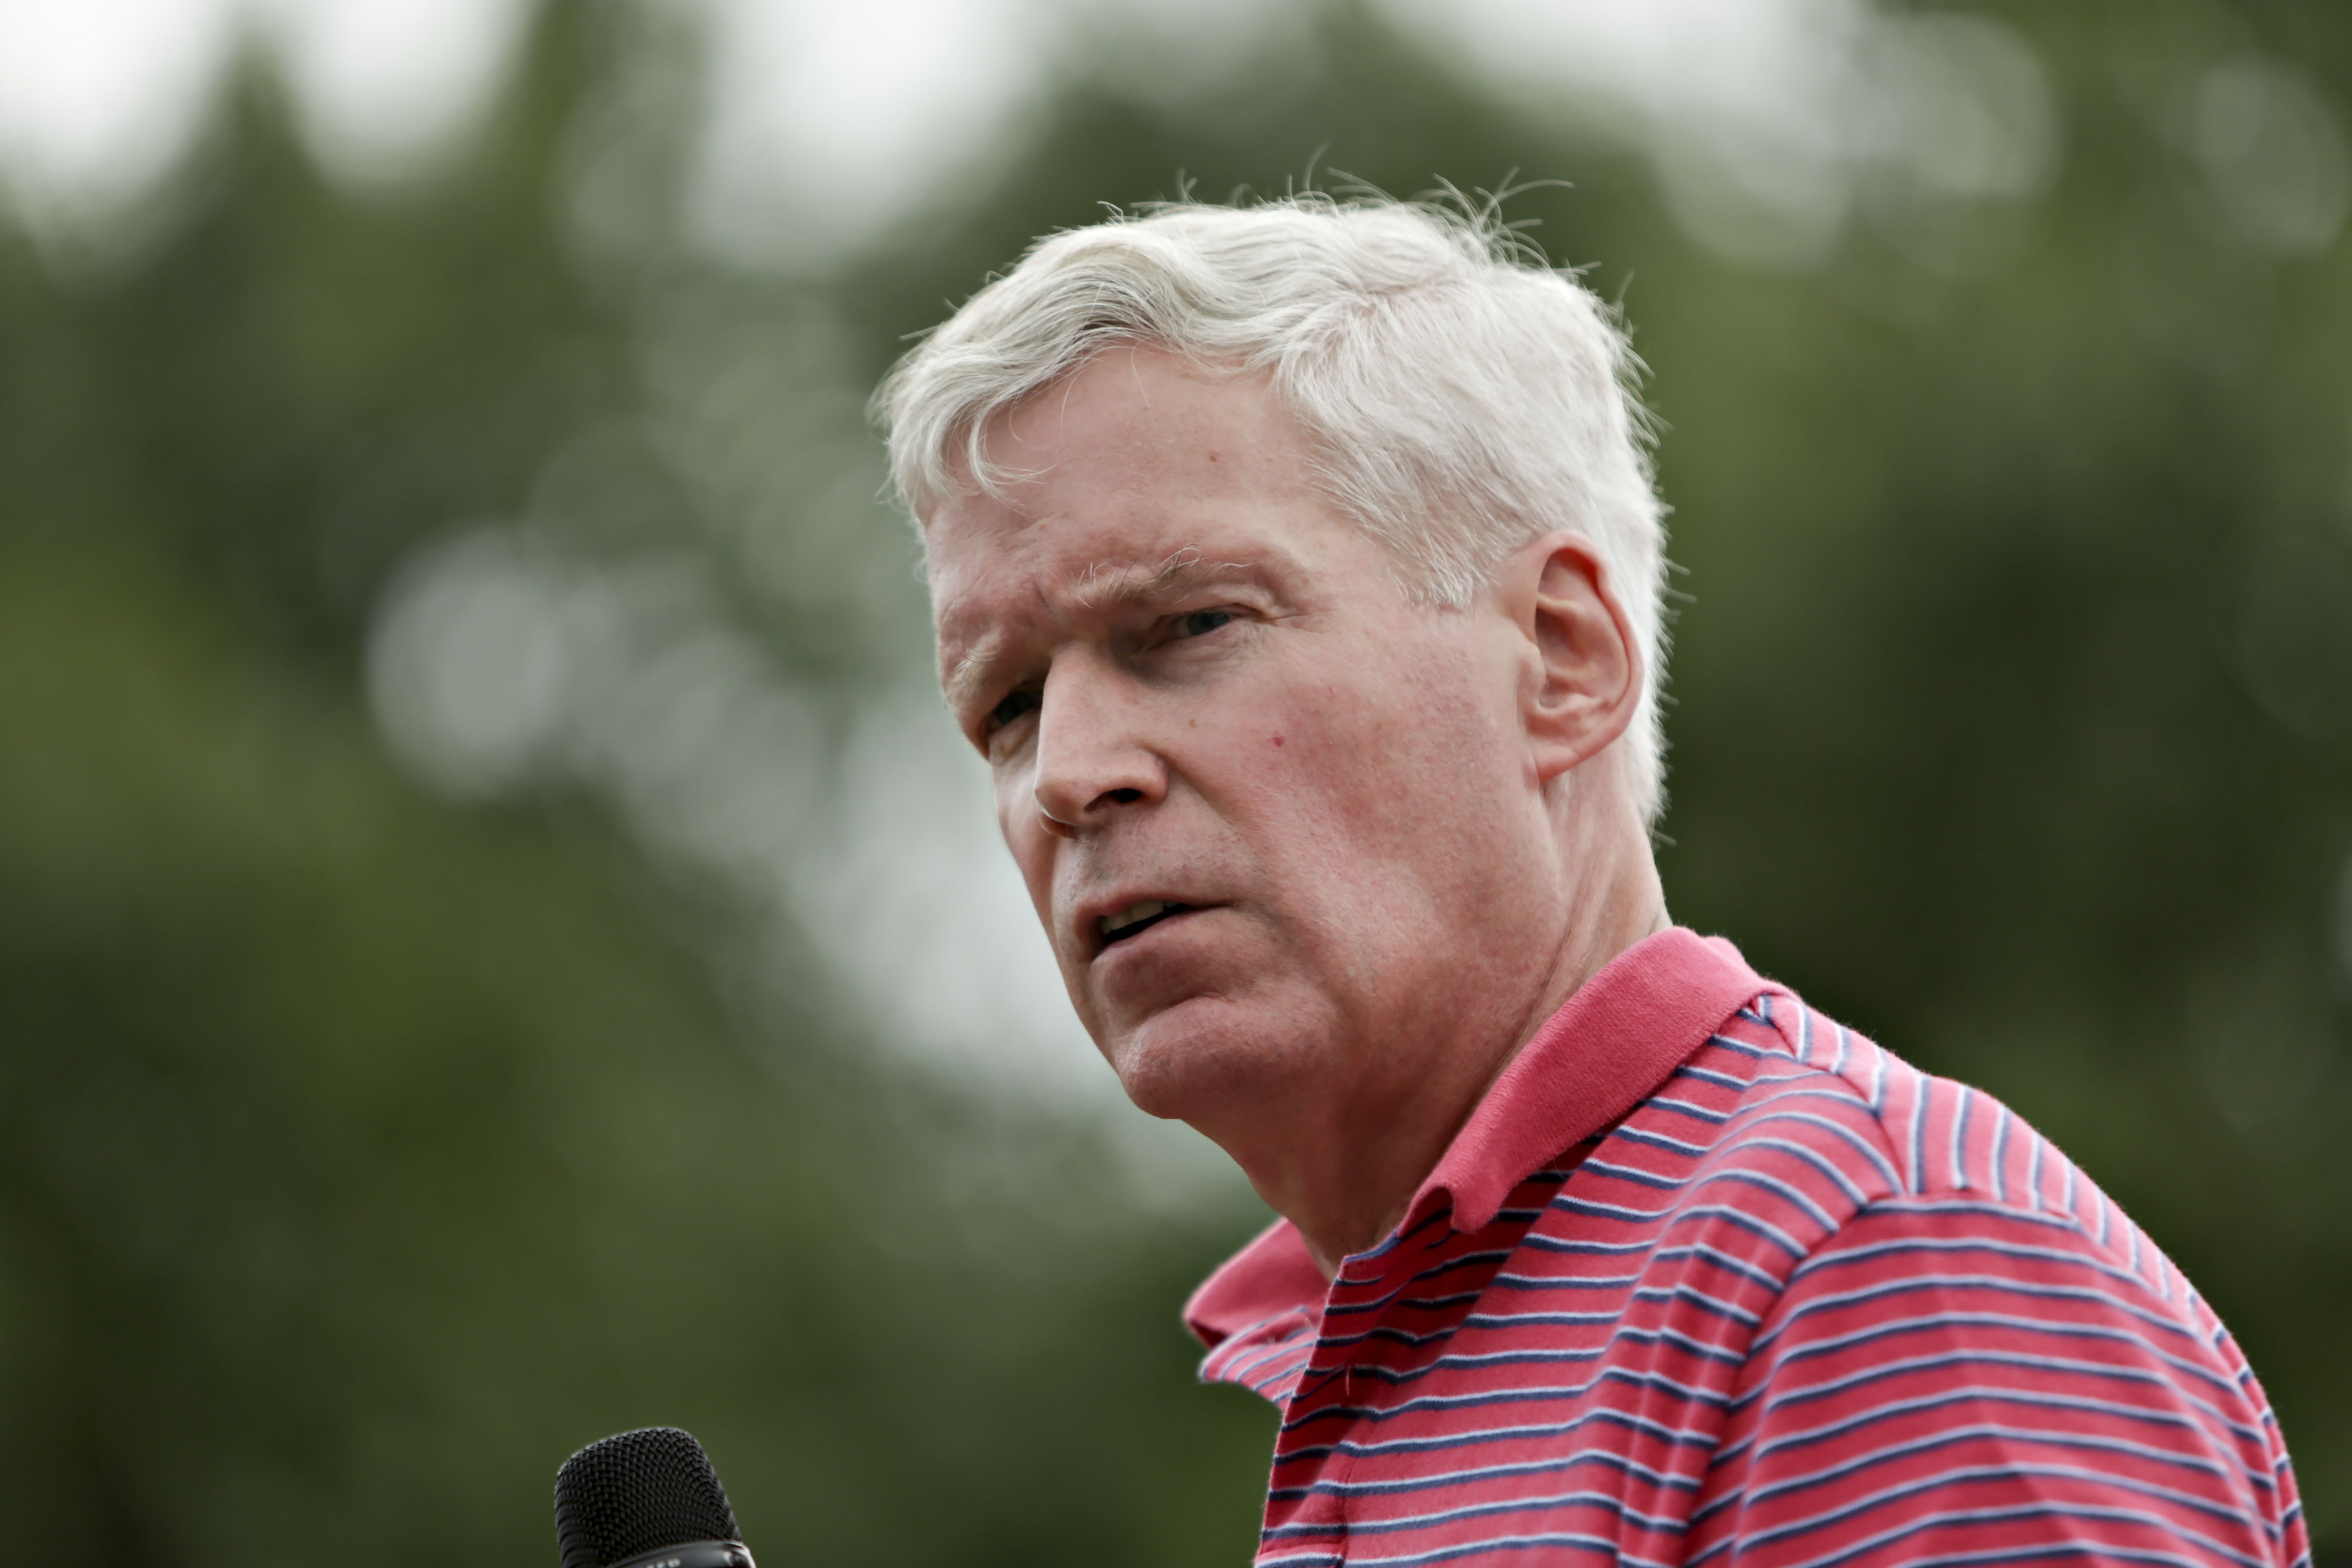 Mark Everson, former commissioner of the U.S. Internal Revenue Service and 2016 Republican presidential candidate, speaks at the Iowa State Fair Soapbox in Des Moines, Iowa, U.S., on Saturday, Aug. 22, 2015. (Daniel Acker&mdash;Bloomberg/Getty Images)